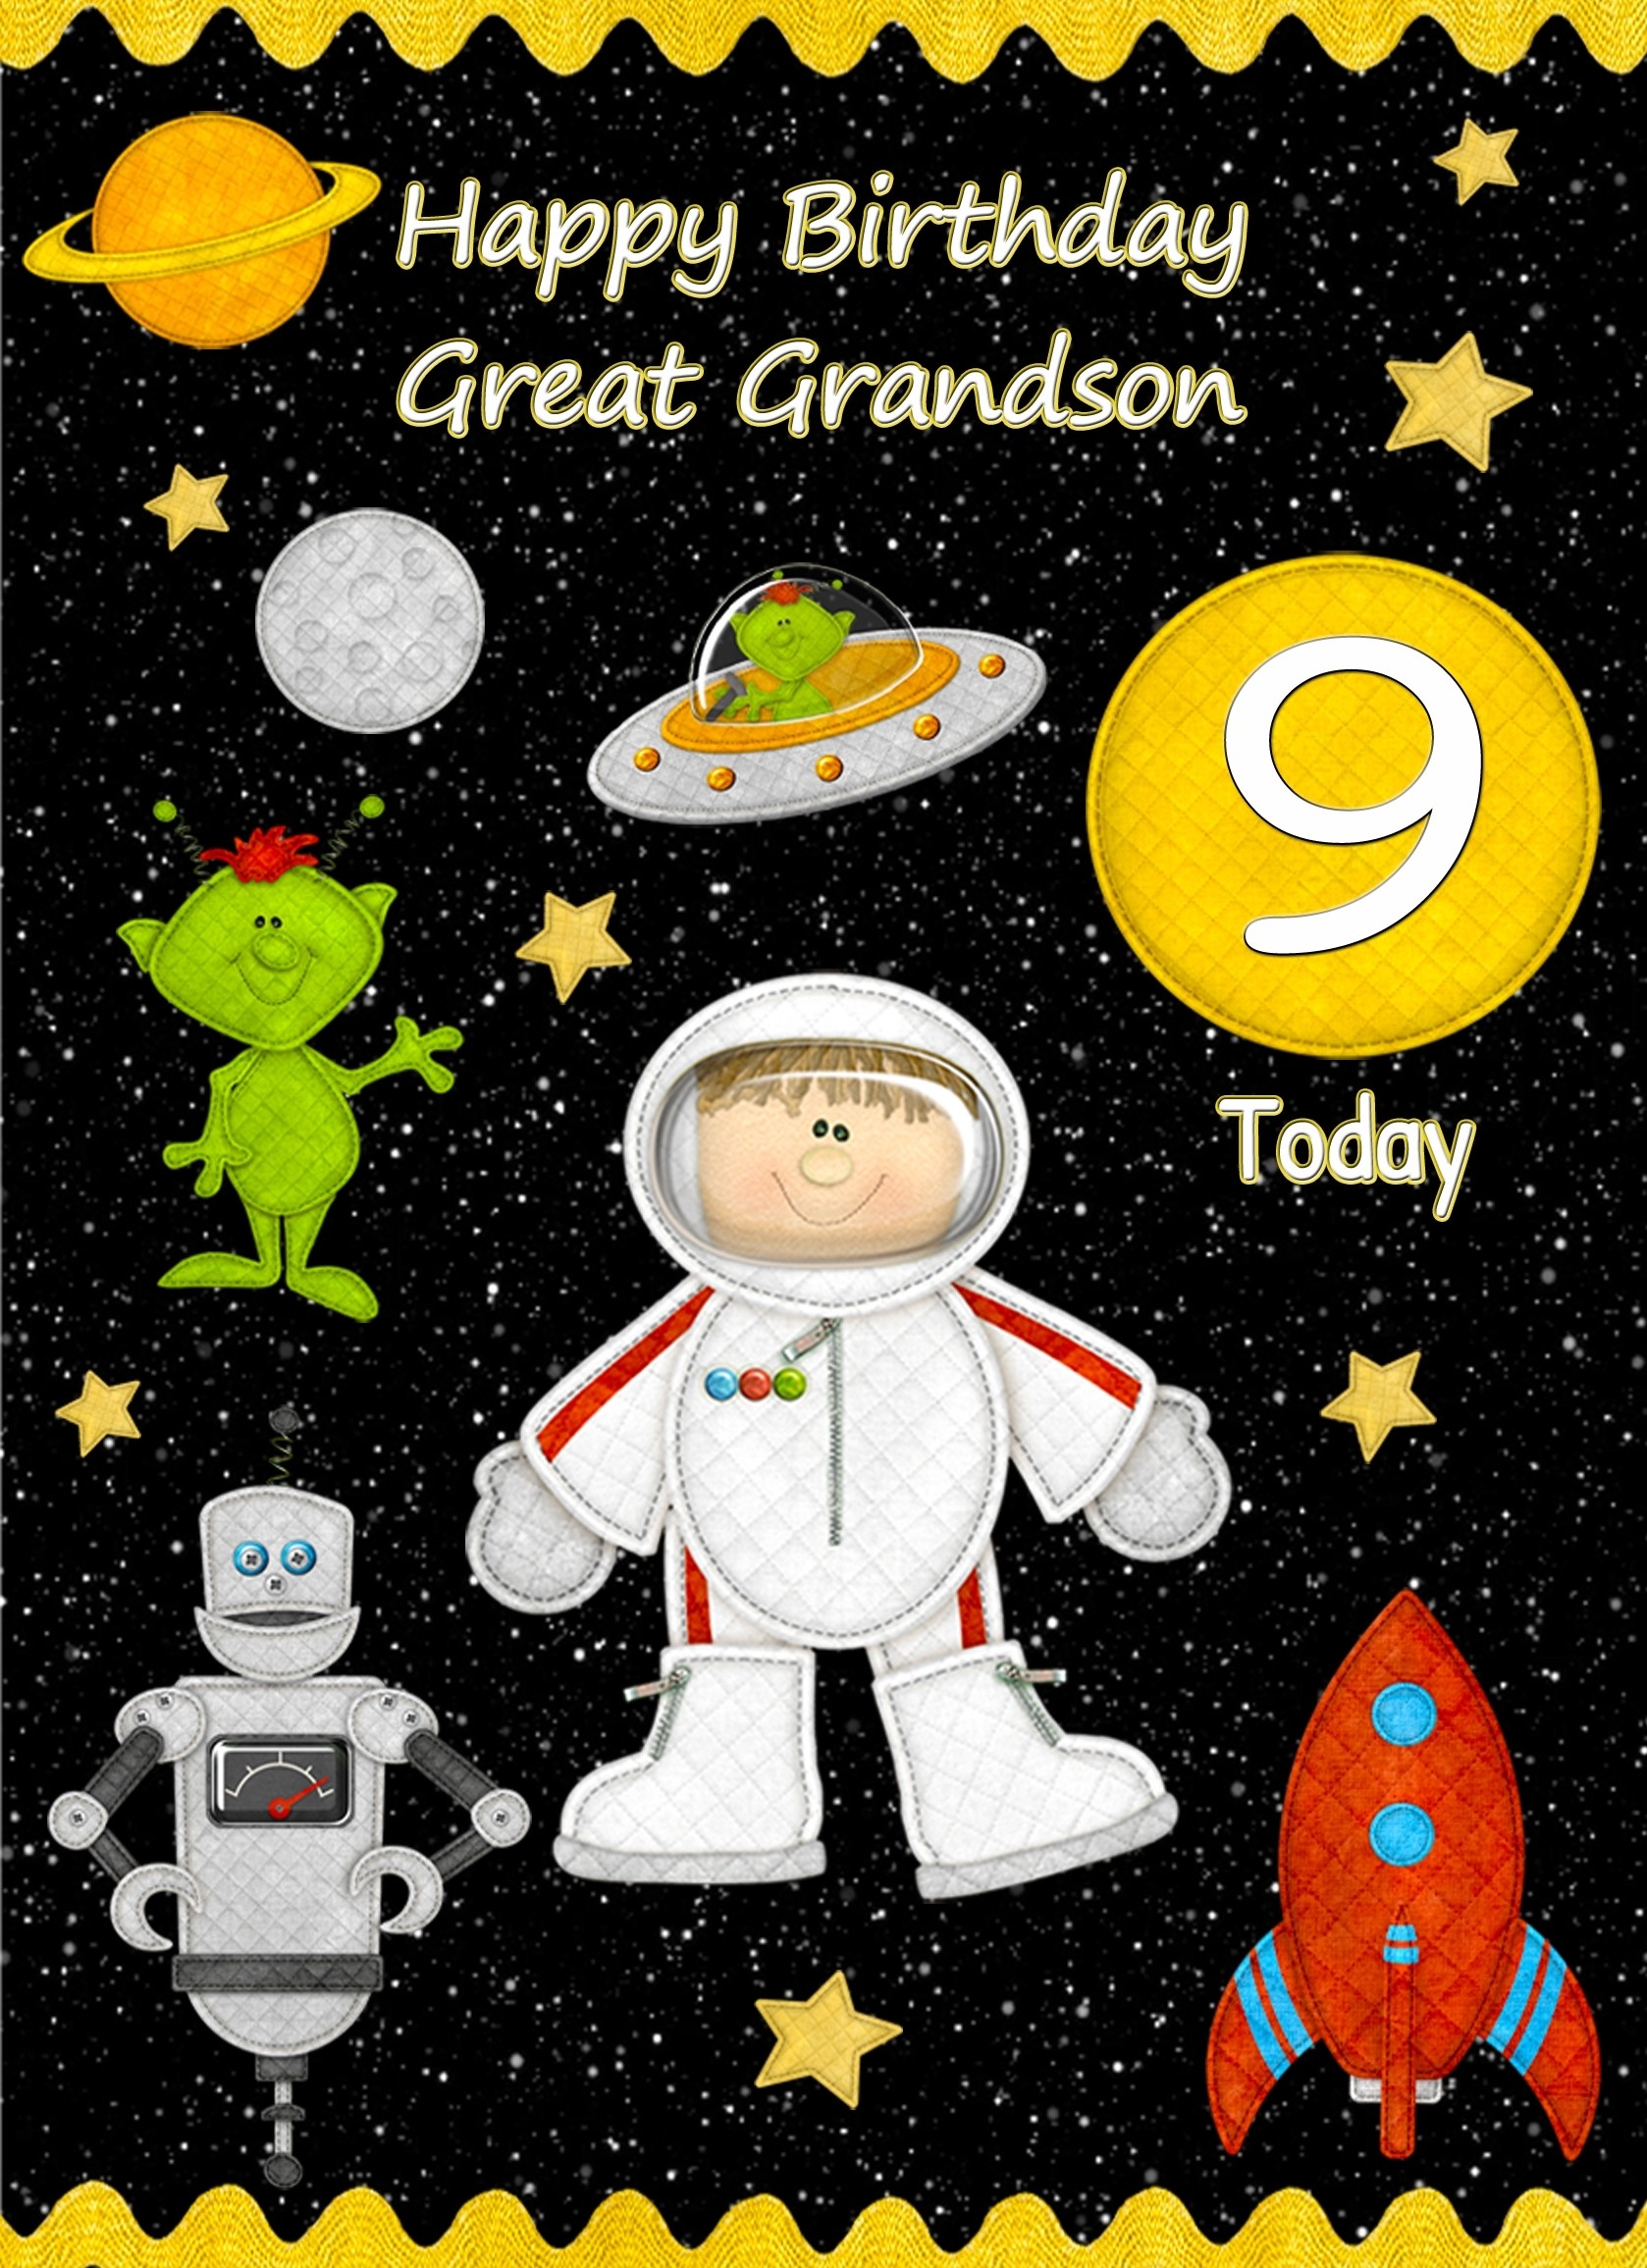 Kids 9th Birthday Space Astronaut Cartoon Card for Great Grandson